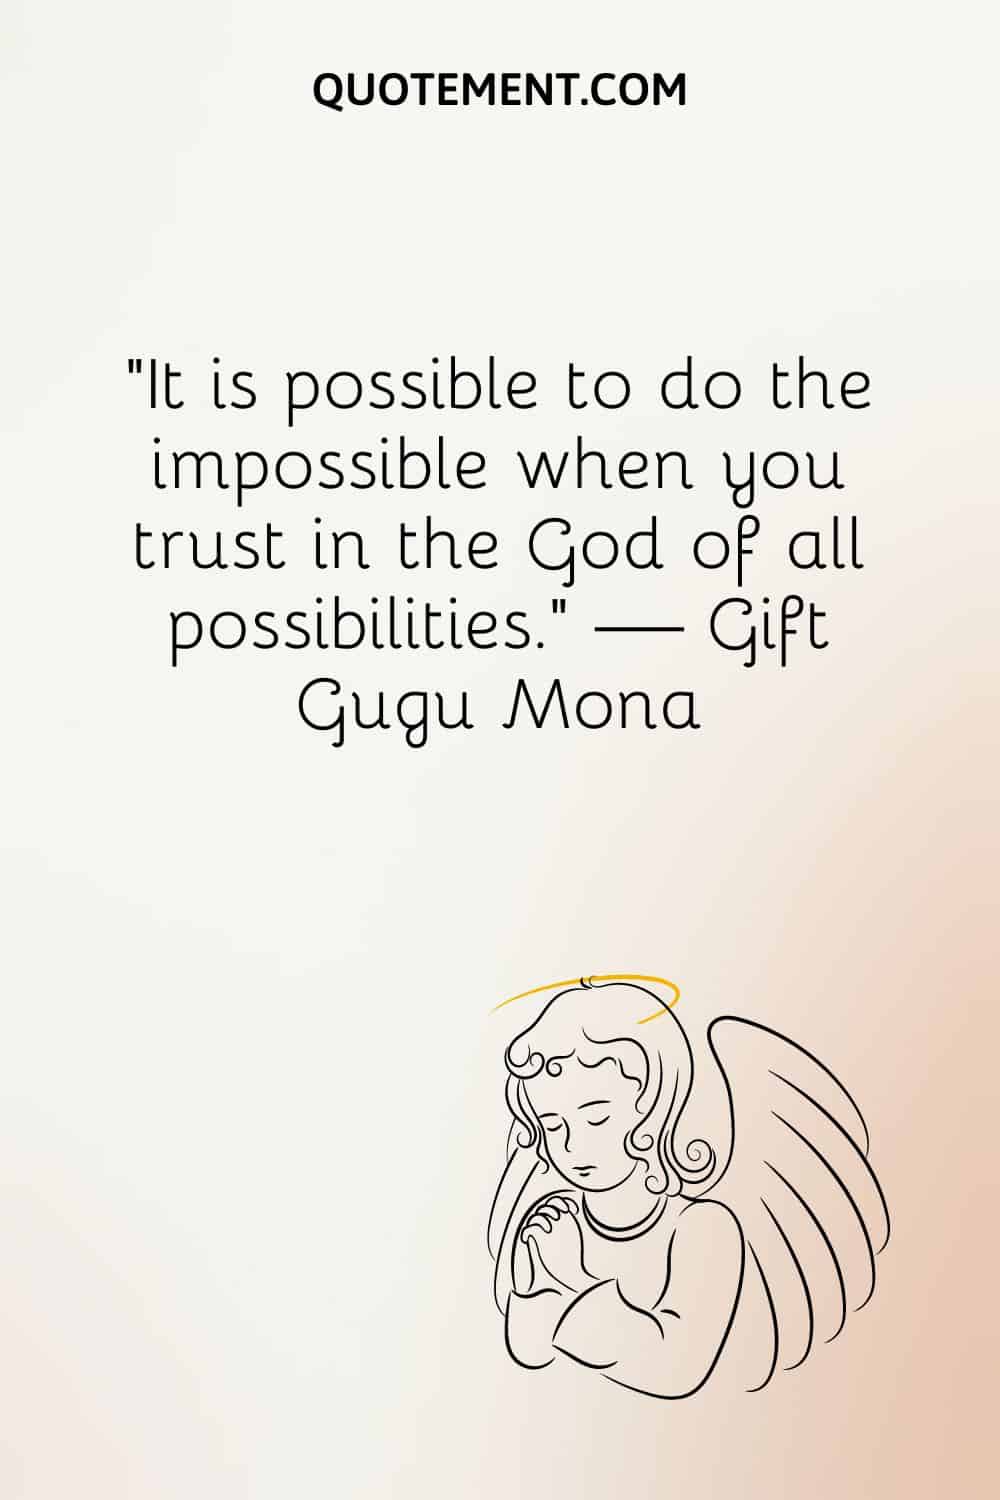 It is possible to do the impossible when you trust in the God of all possibilities